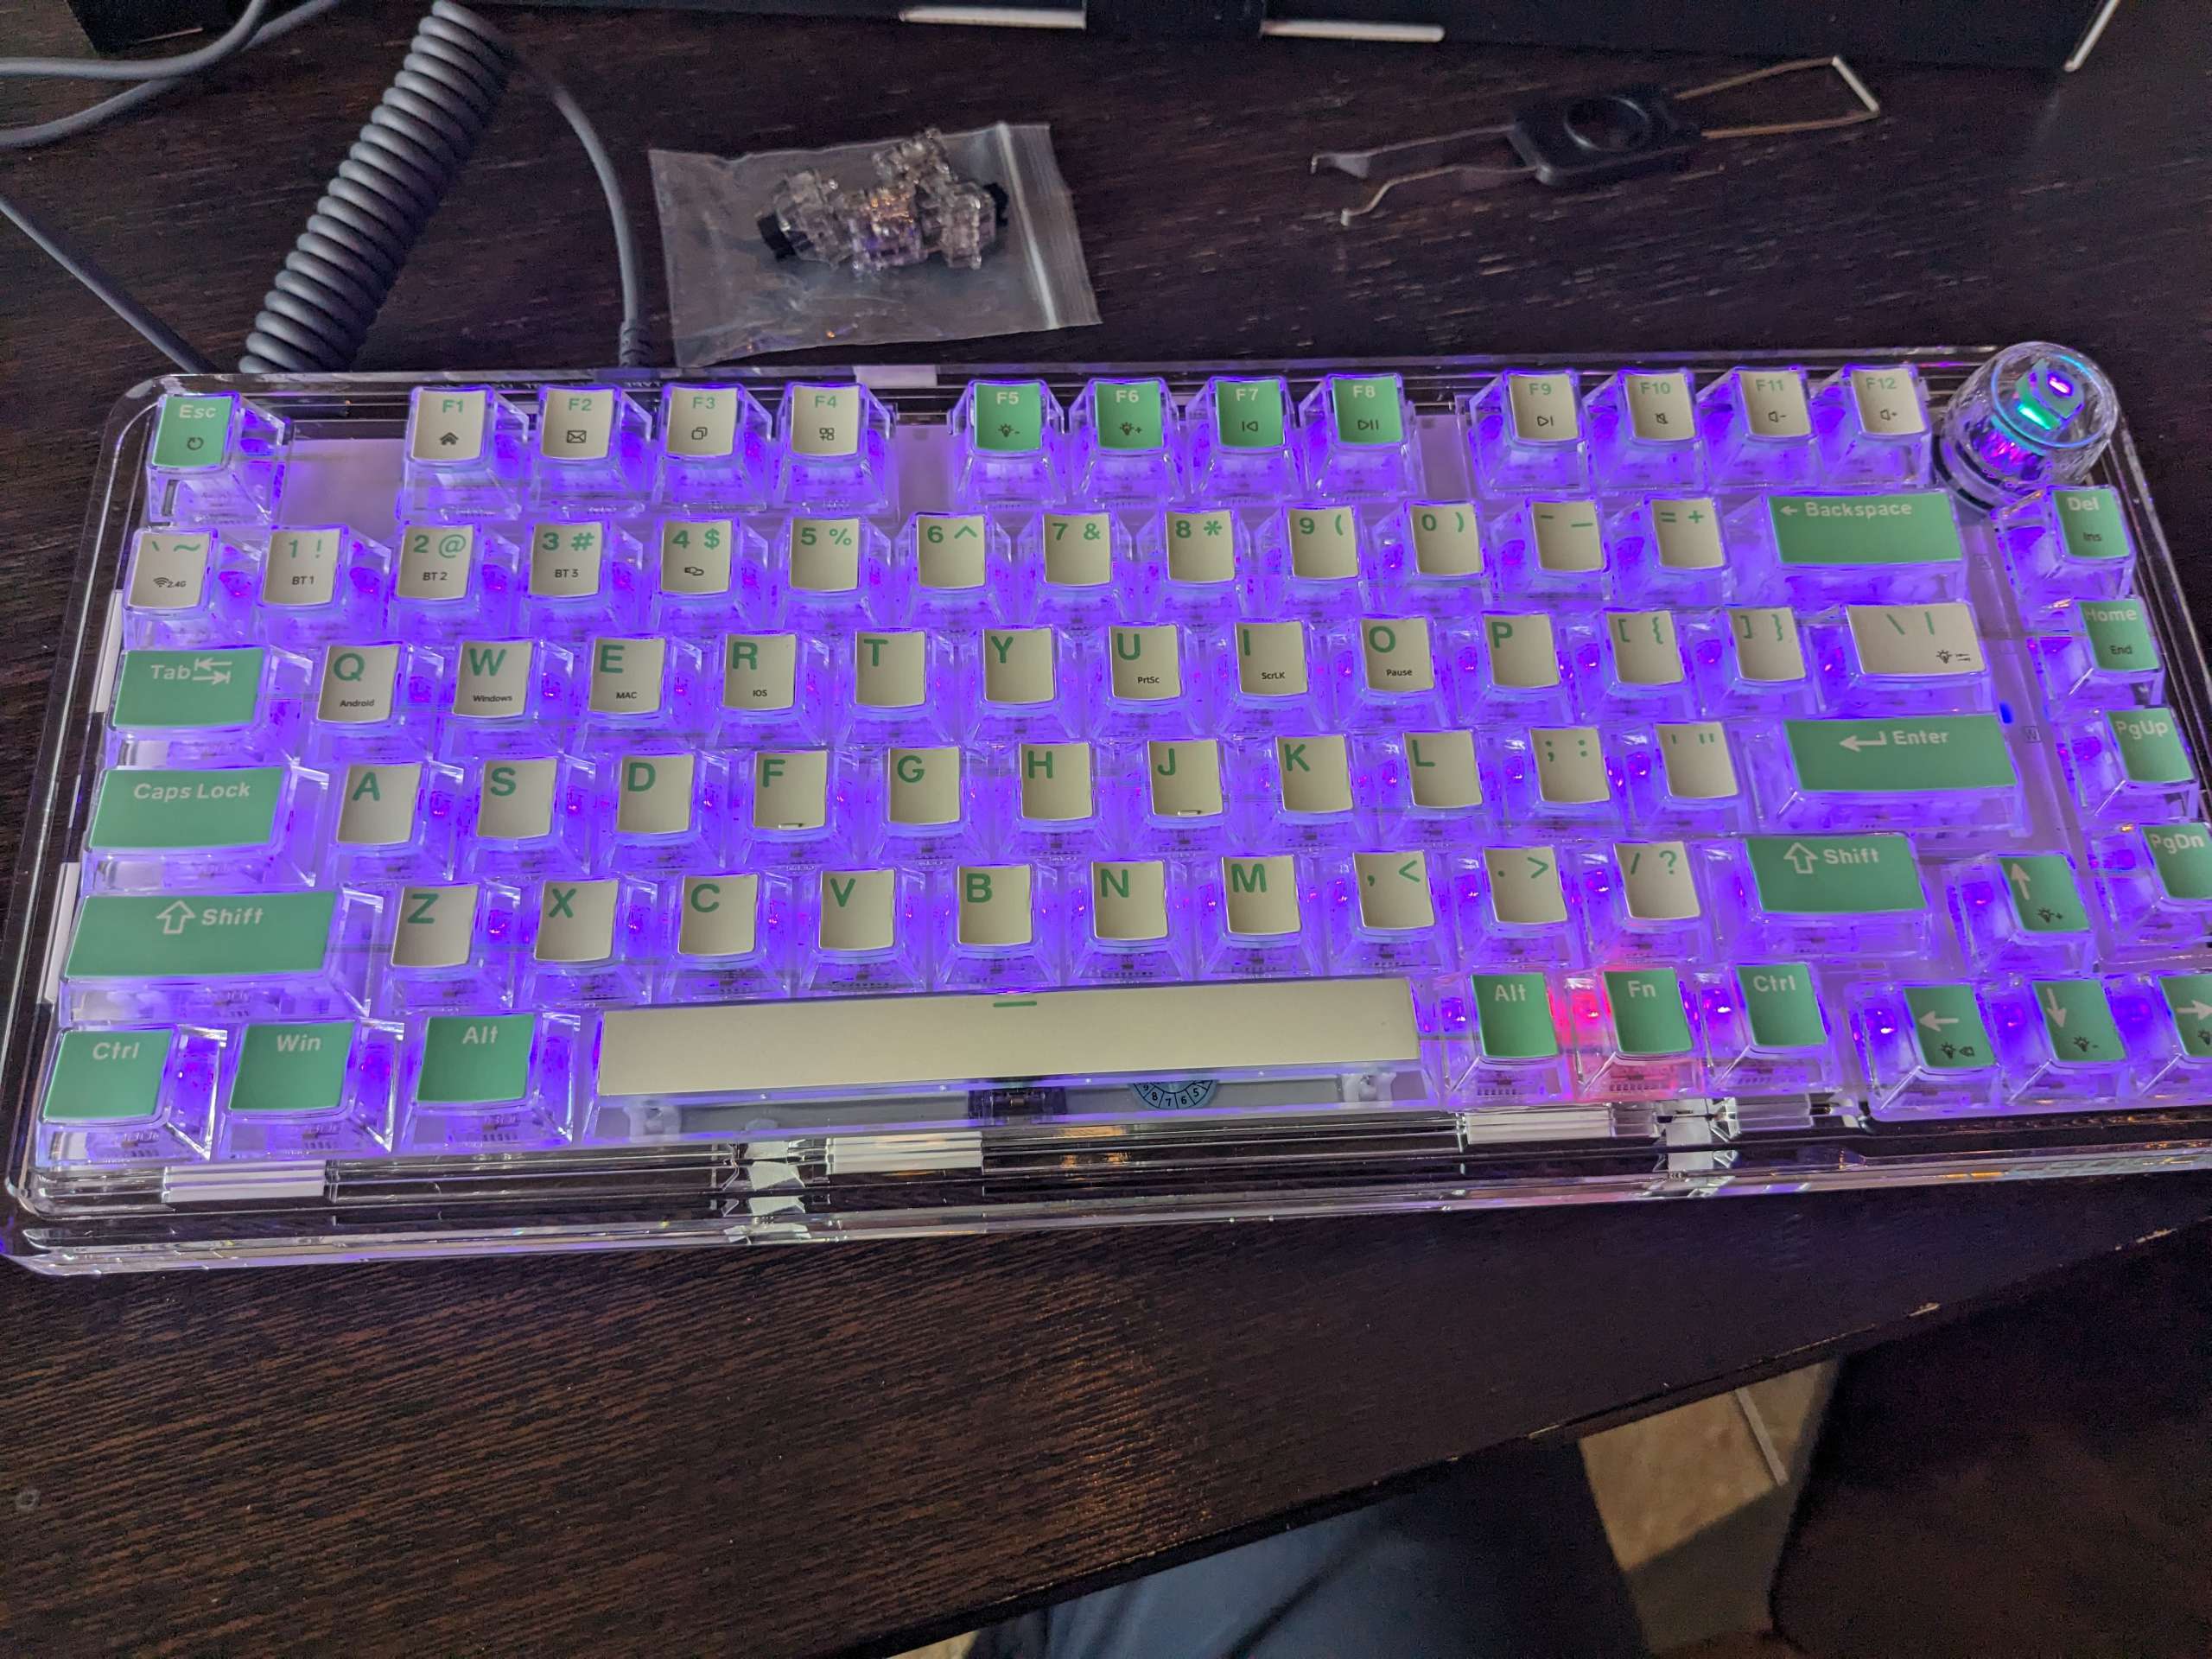 Keyboard with blue lights on